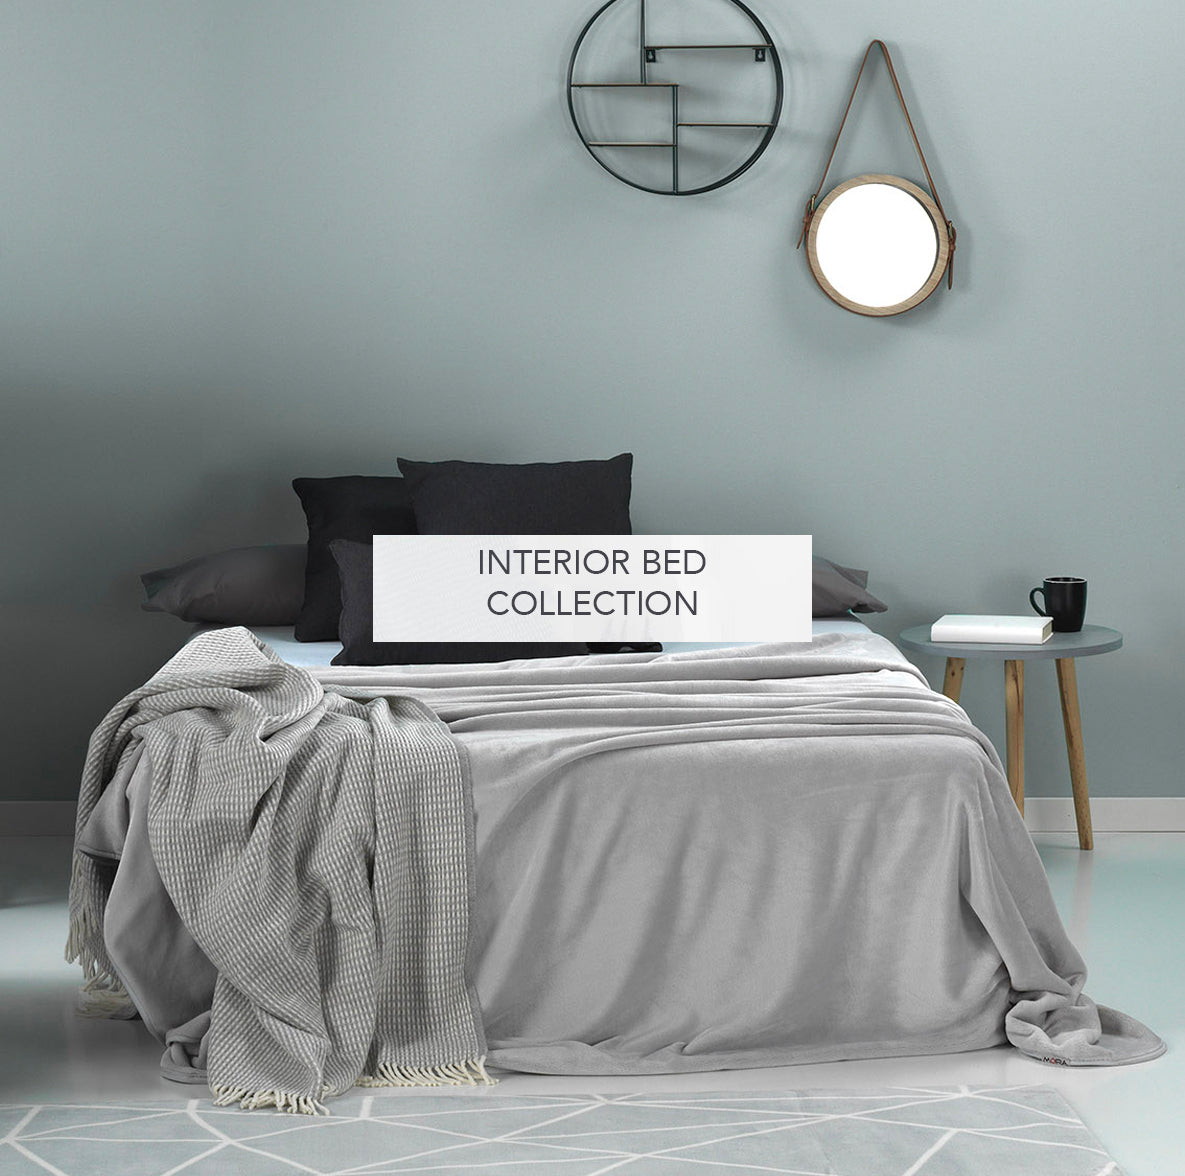 INTERIOR BED COLLECTION